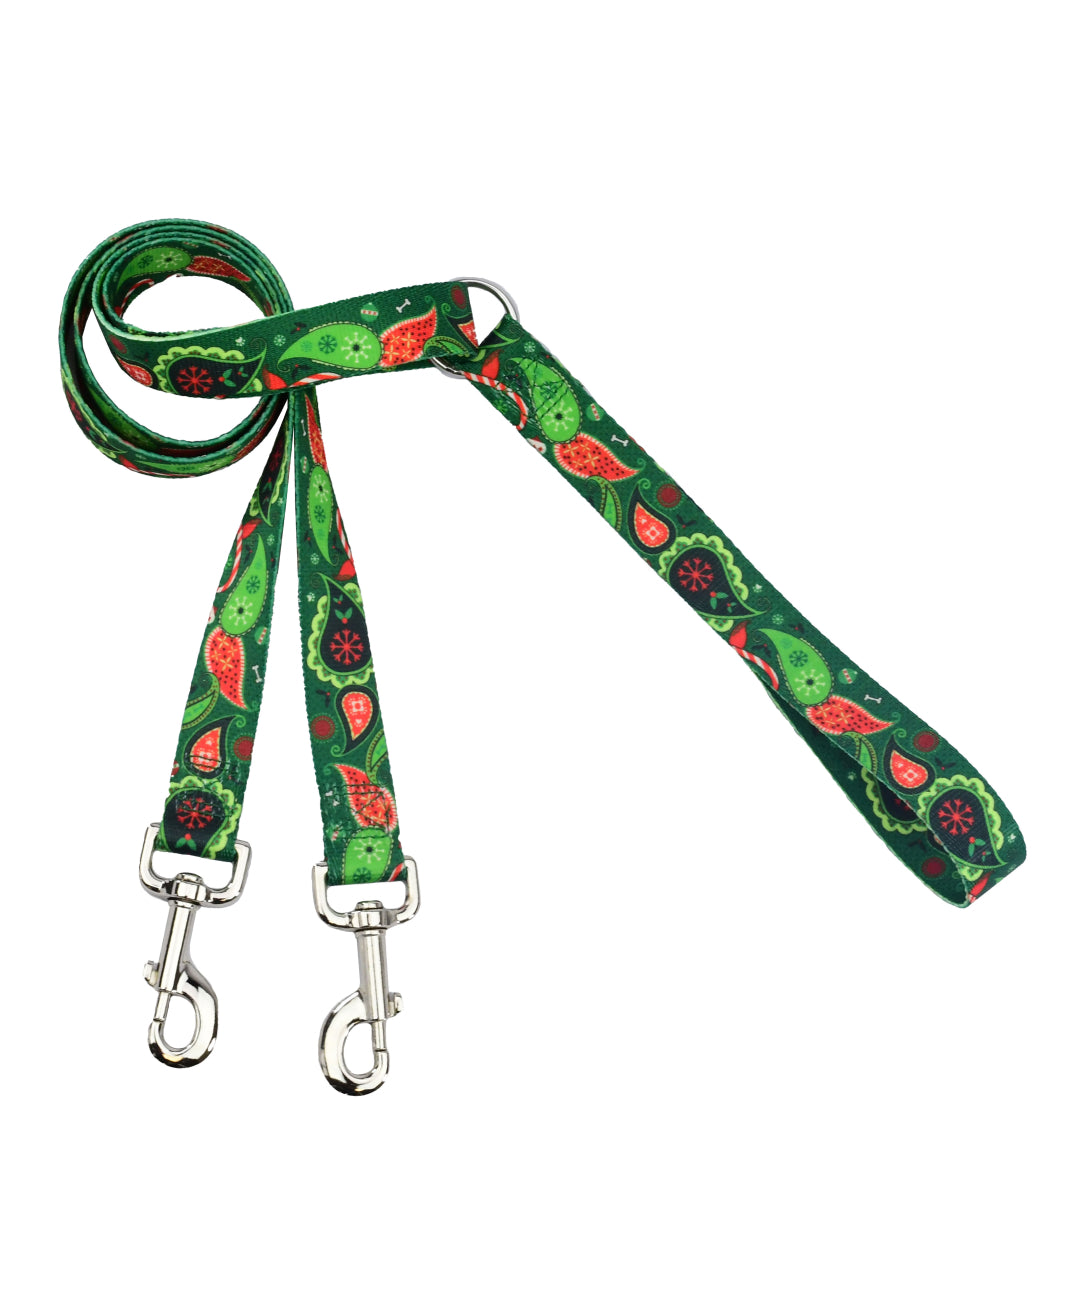 2 Hounds Holiday Paisley Freedom No-Pull Dog Harness Harness 2 Hounds Design 